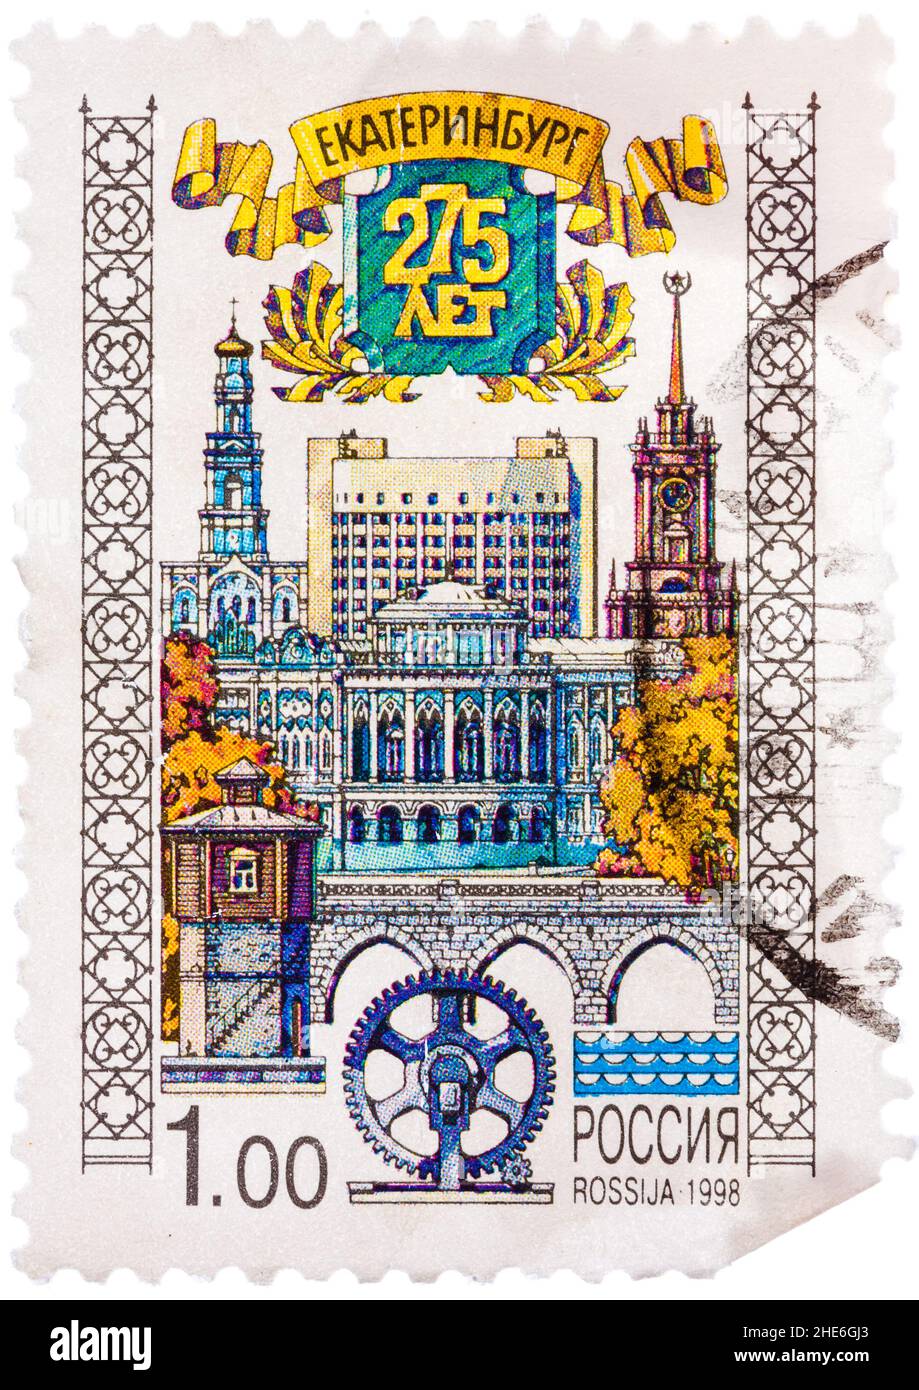 Stamp printed by Russia, shows 275th anniversary Ekaterinburg (Yekaterinburg) - Russia's largest city Stock Photo